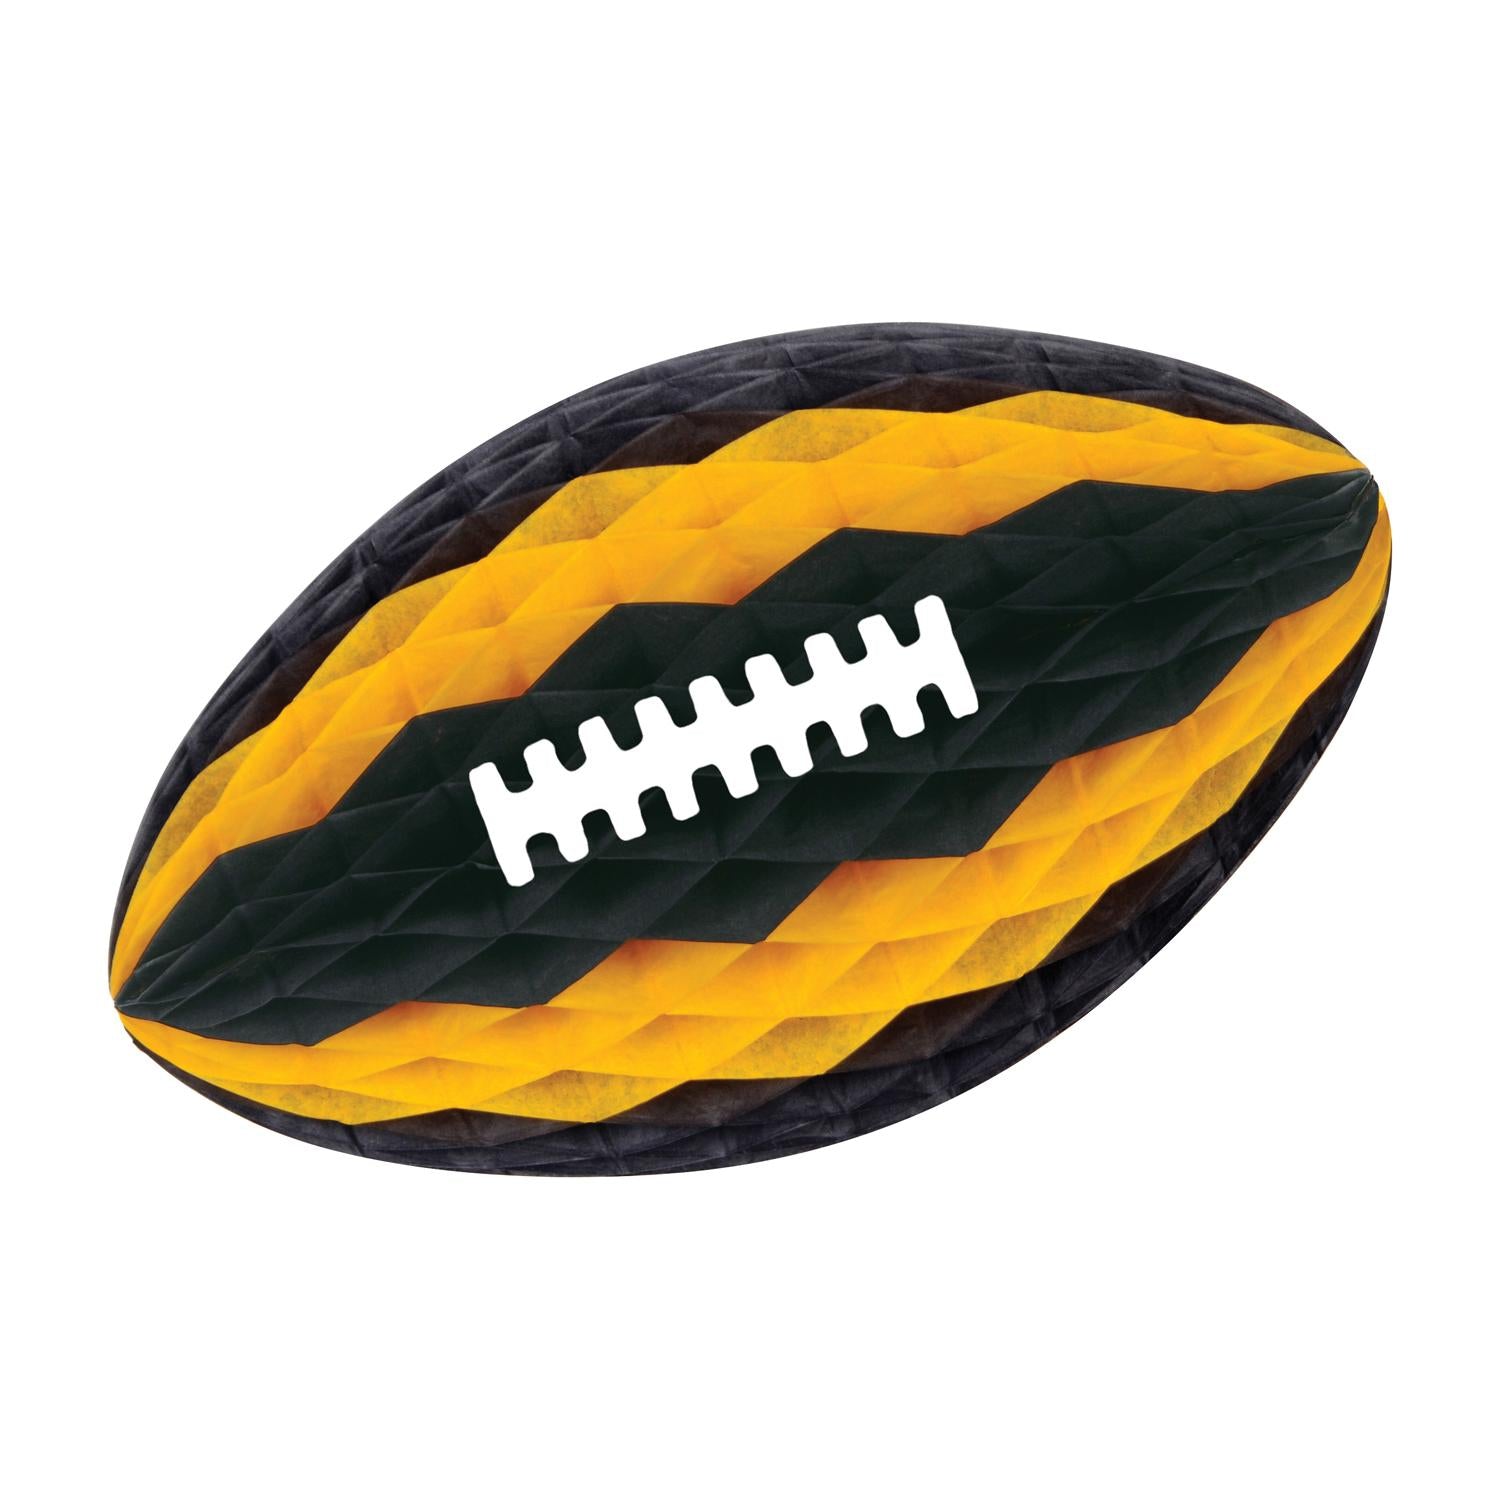 Beistle Packaged Party Tissue Football with Laces